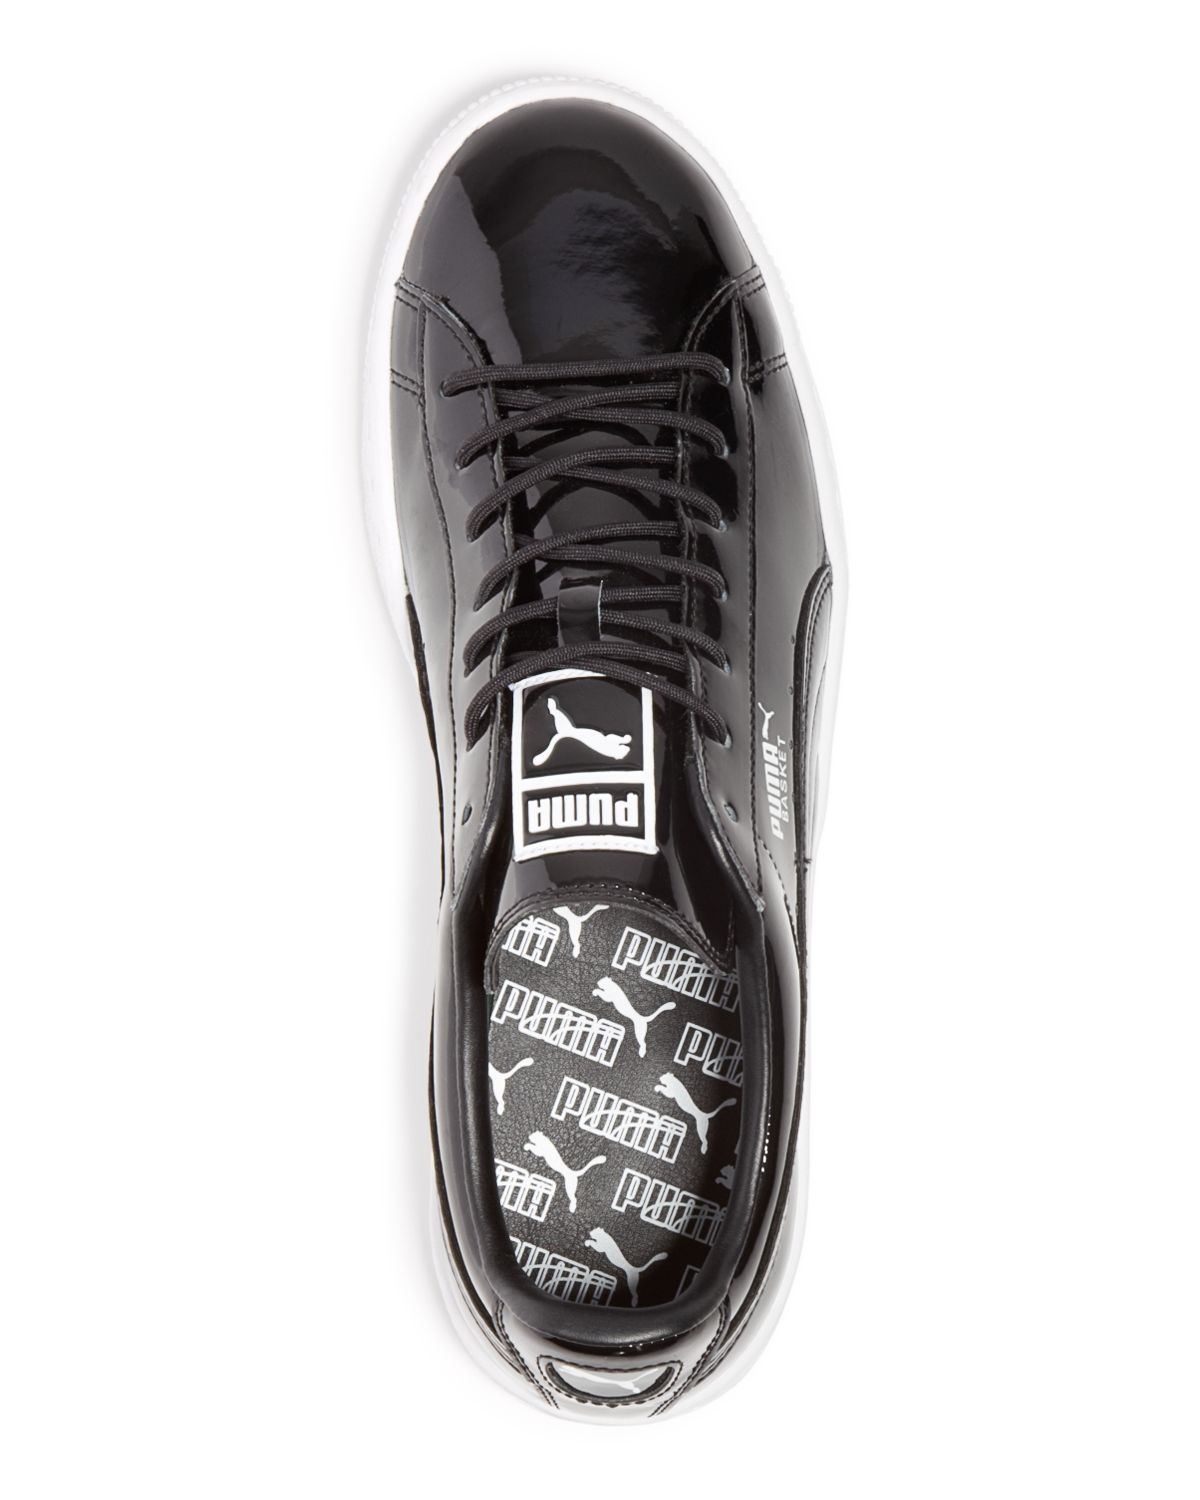 PUMA Basket Patent Leather Sneakers in Black/White (Black) for Men | Lyst